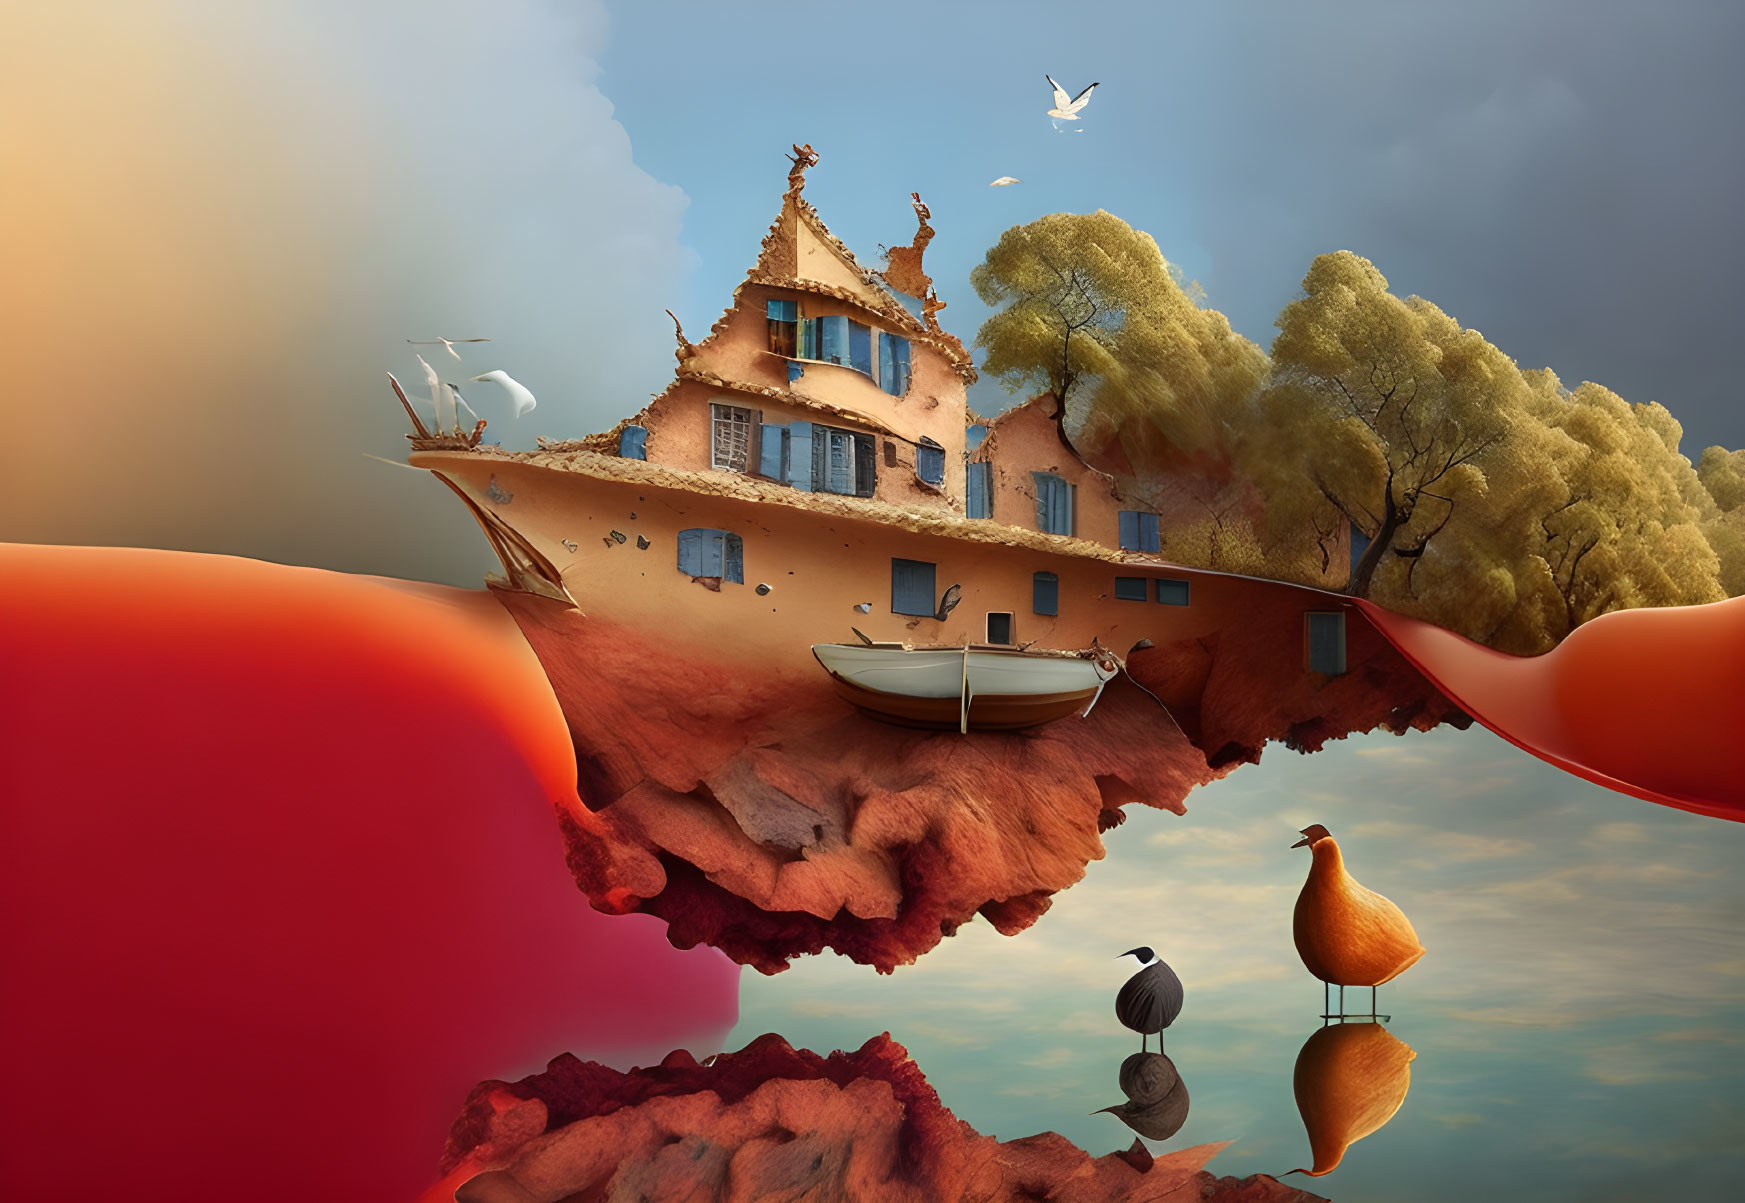 Floating Island with Orange House, Trees, Boat, and Birds in Surreal Scene